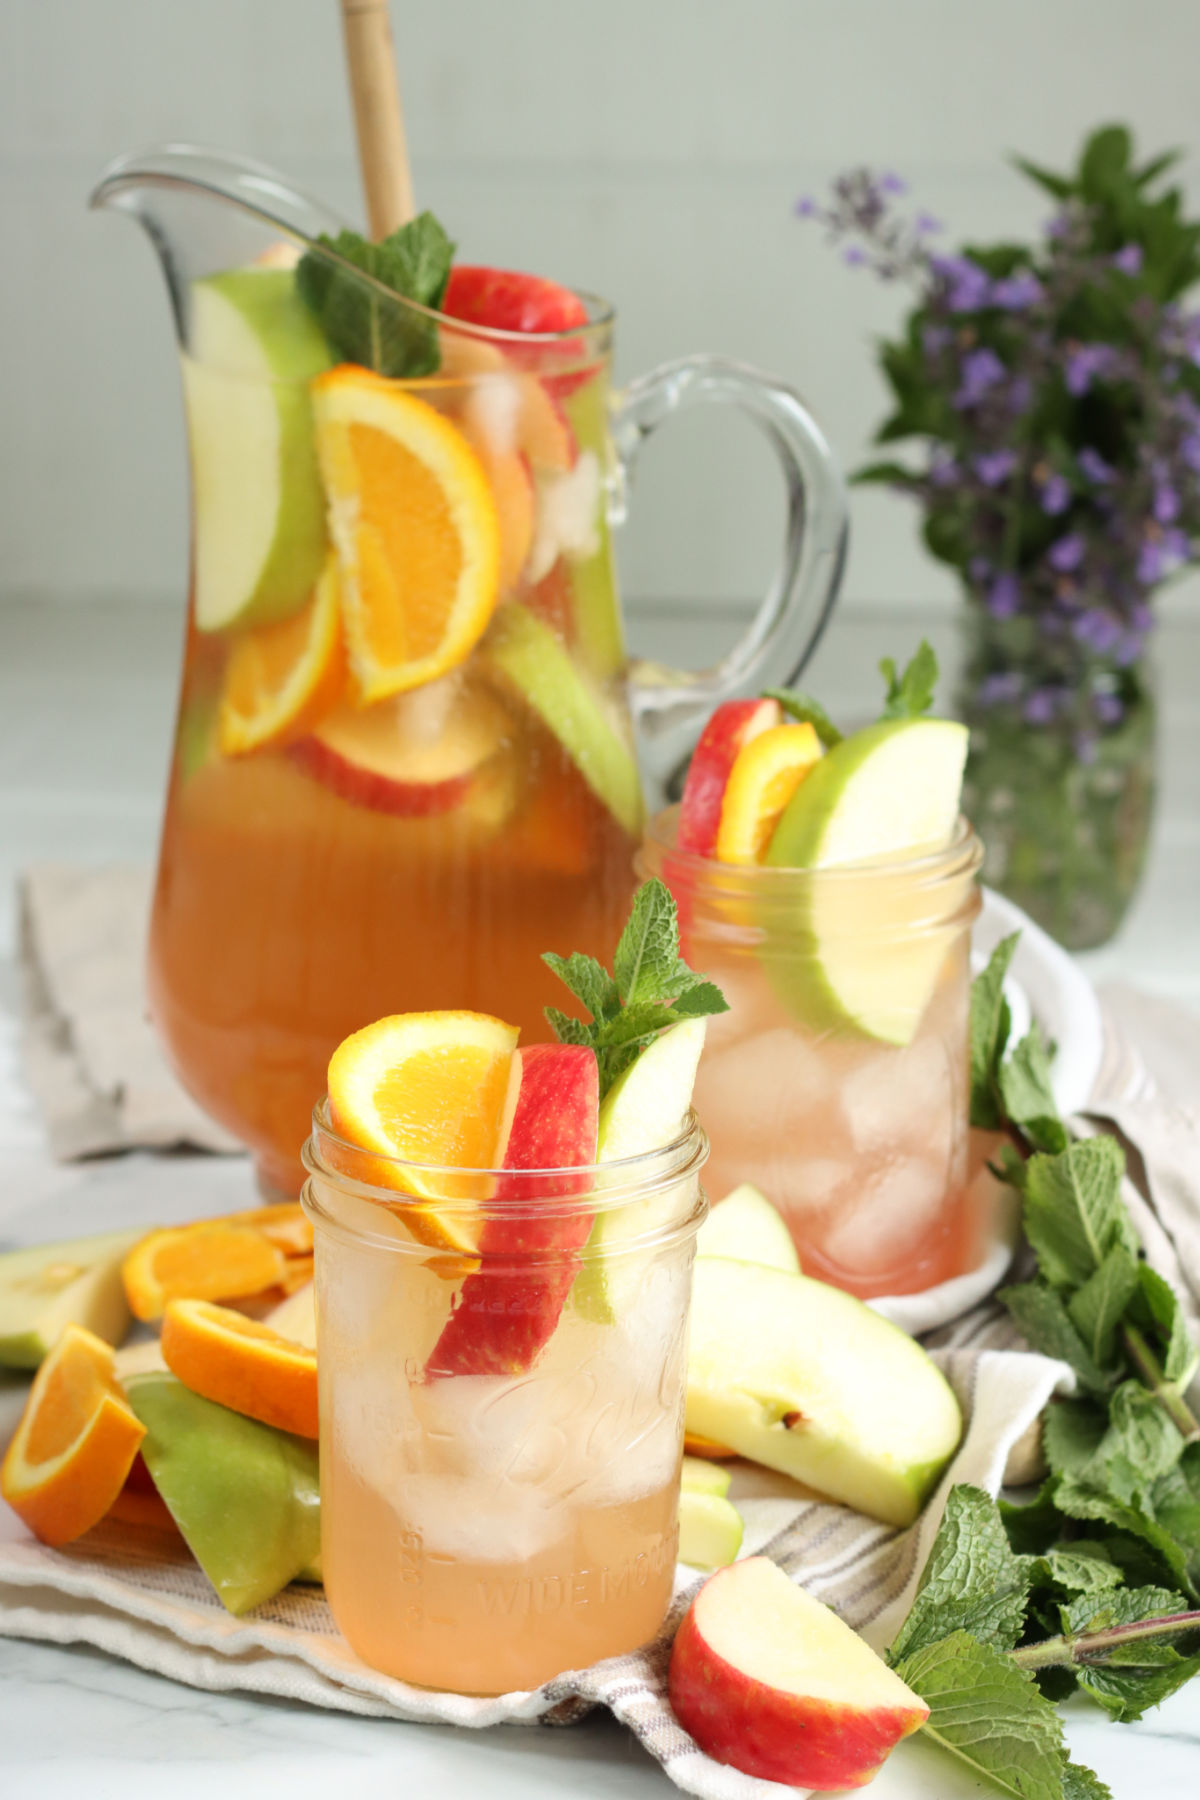 Mason jars with white sangria, ice cubes, red and green apple slices, orange slices, fresh mint.